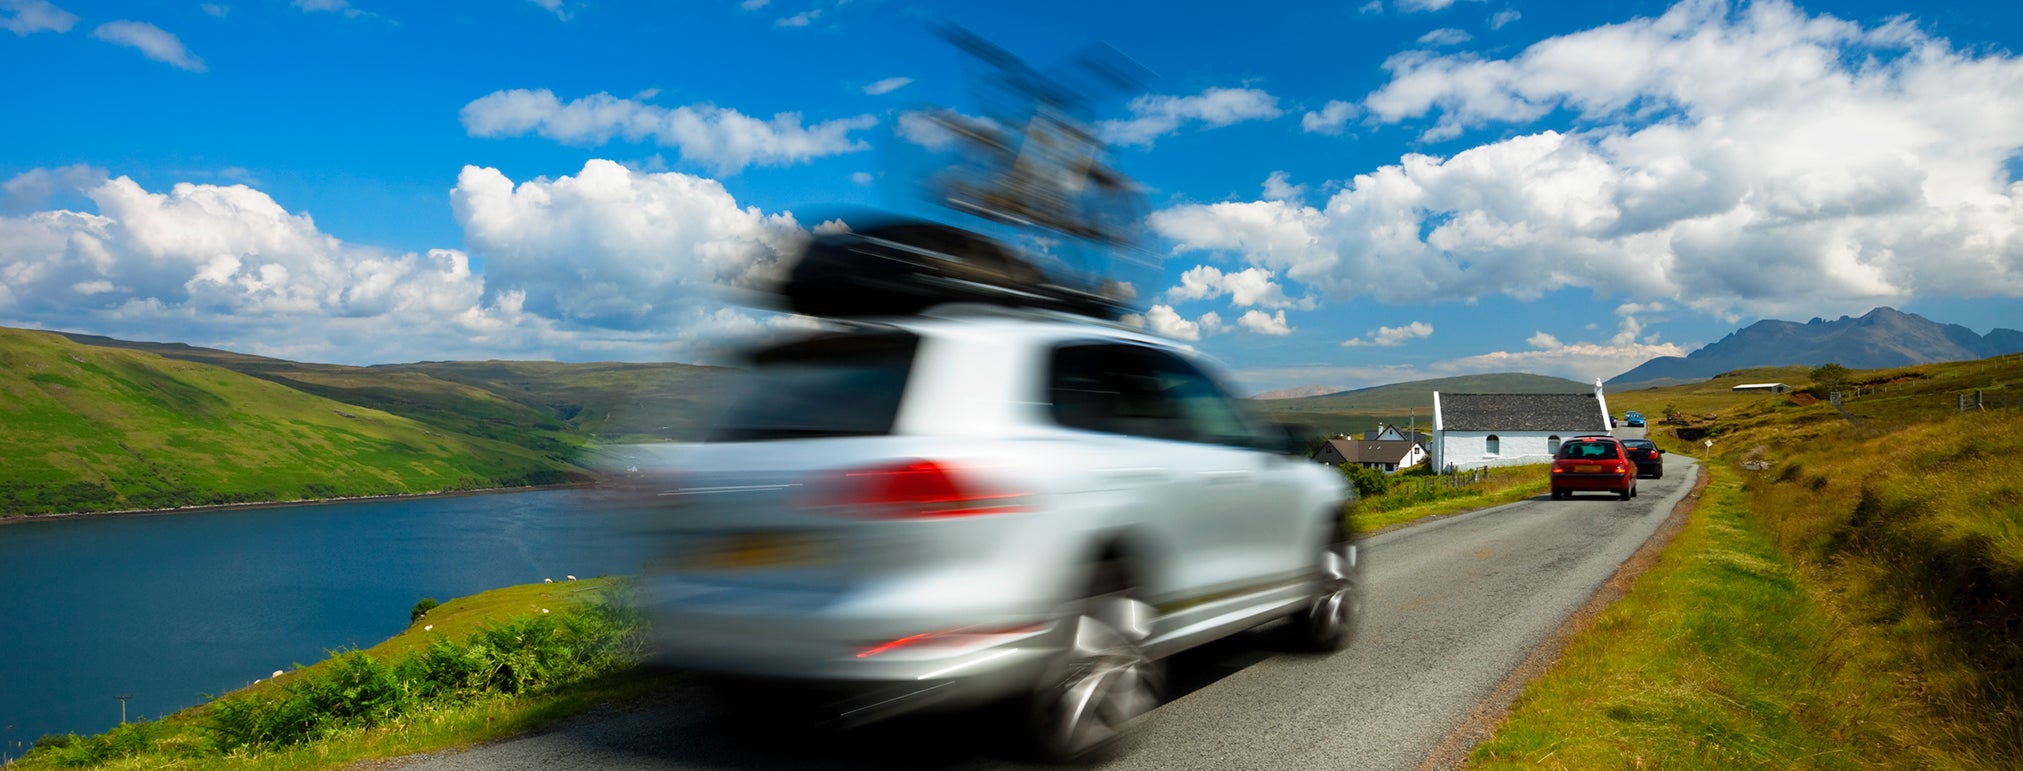 car driving with bike on roof on Isle of Skye; Blurred Motion, Scotland, UK,click below to view more related images: